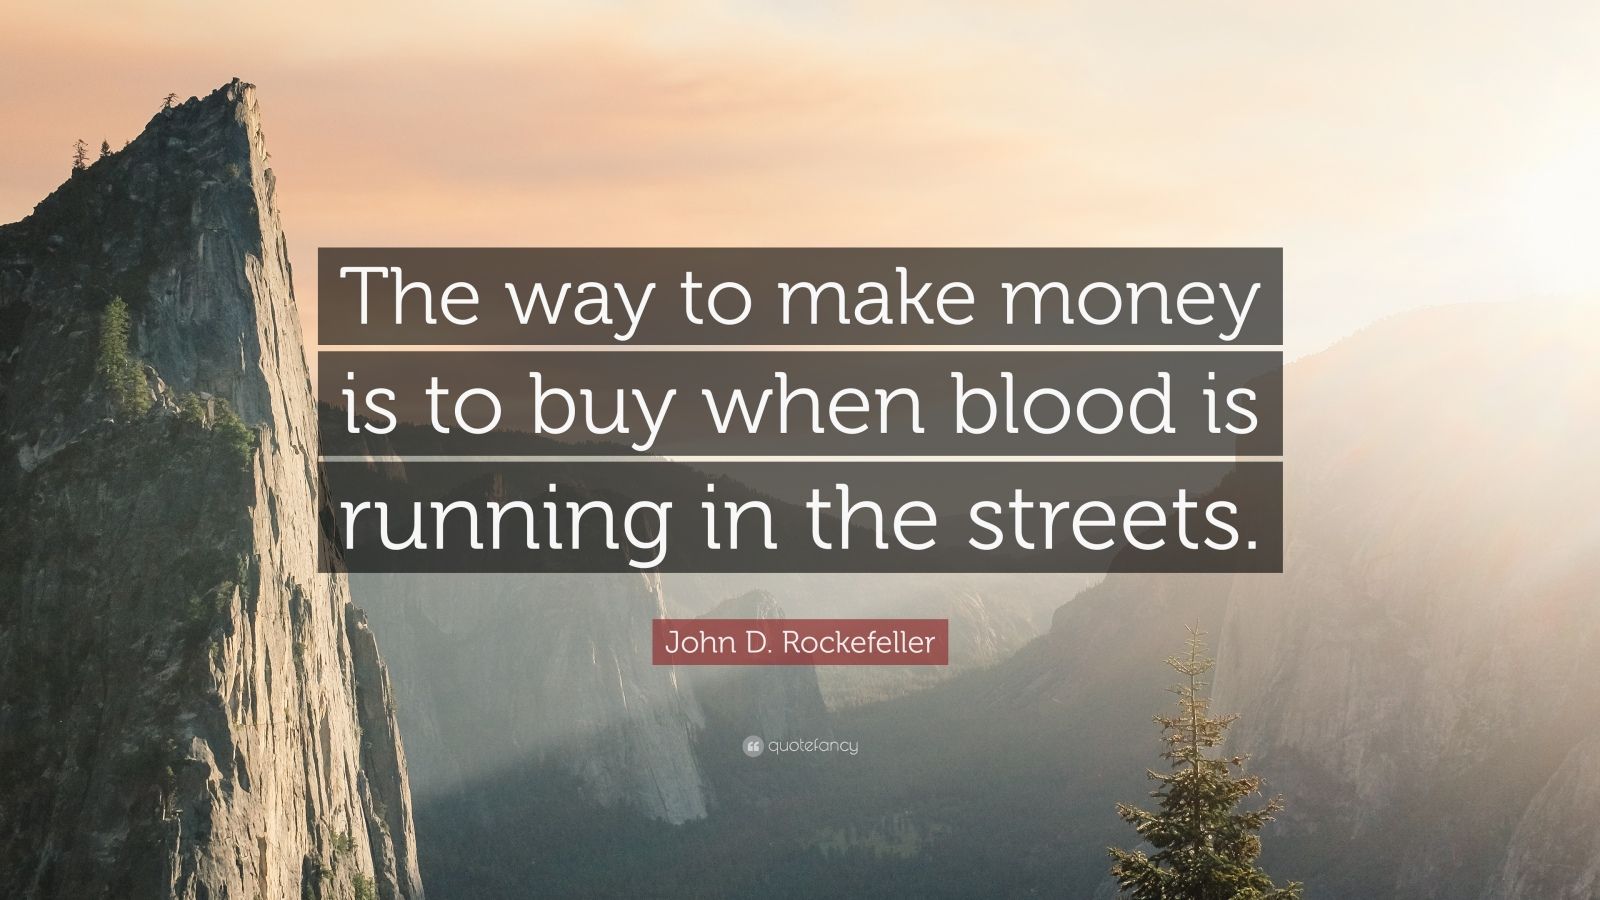 John D. Rockefeller Quote: “The way to make money is to buy when blood